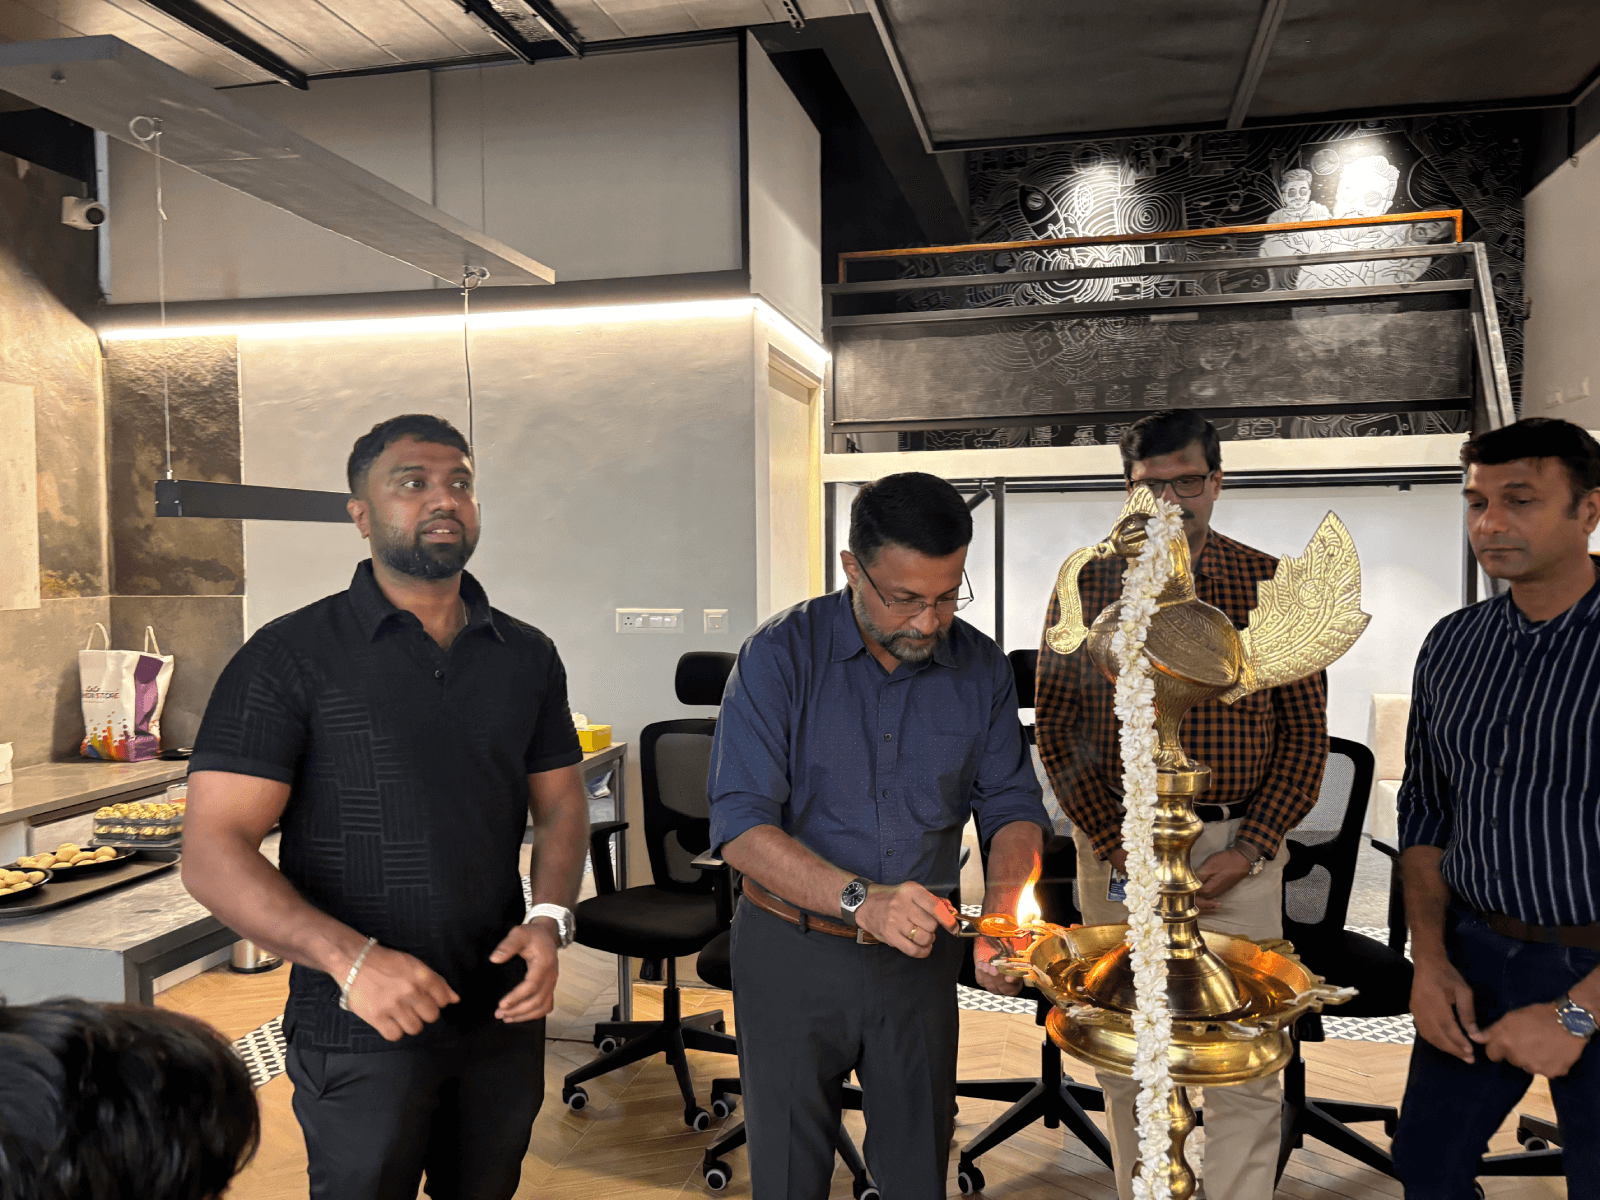 CEO Technopark, Col Sanjeev Nair (Retd.) congratulated Team Marvelloux UI/UX Studio on their 6th anniversary and new beginnings.